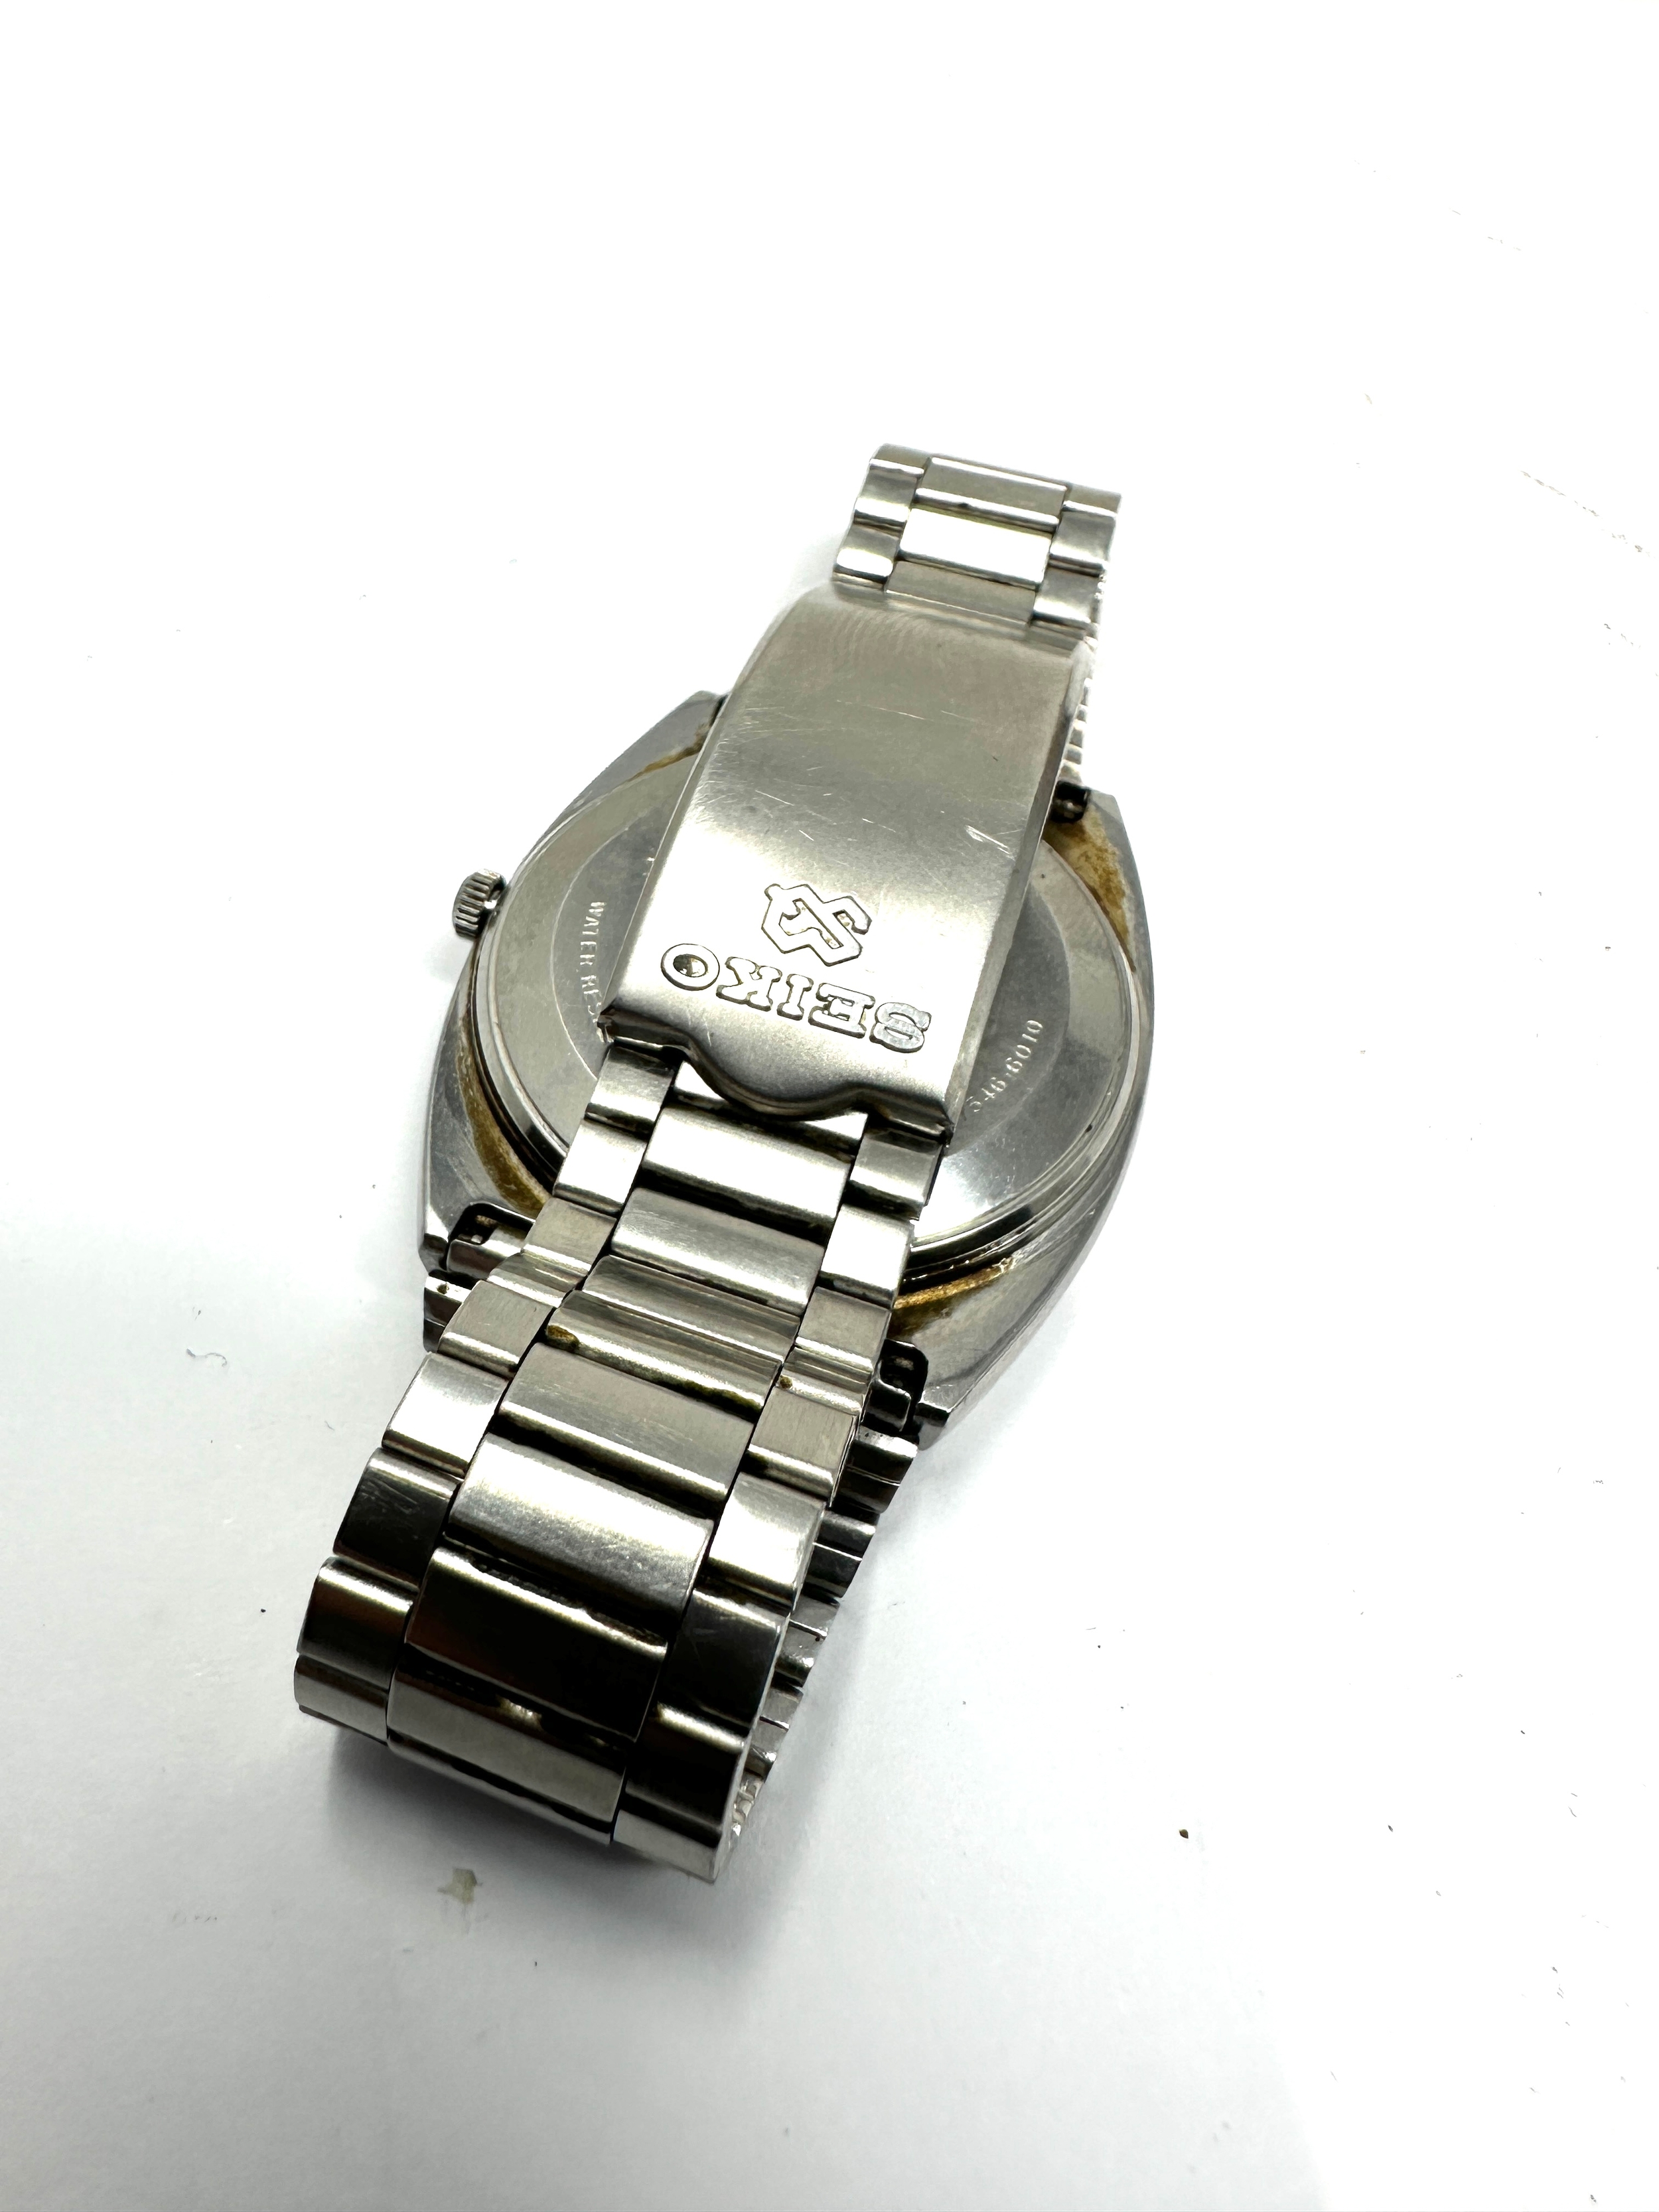 Gents quartz Seiko day date sq 7546-6010 the watch was ticking but has stopped possibly needs - Image 3 of 3